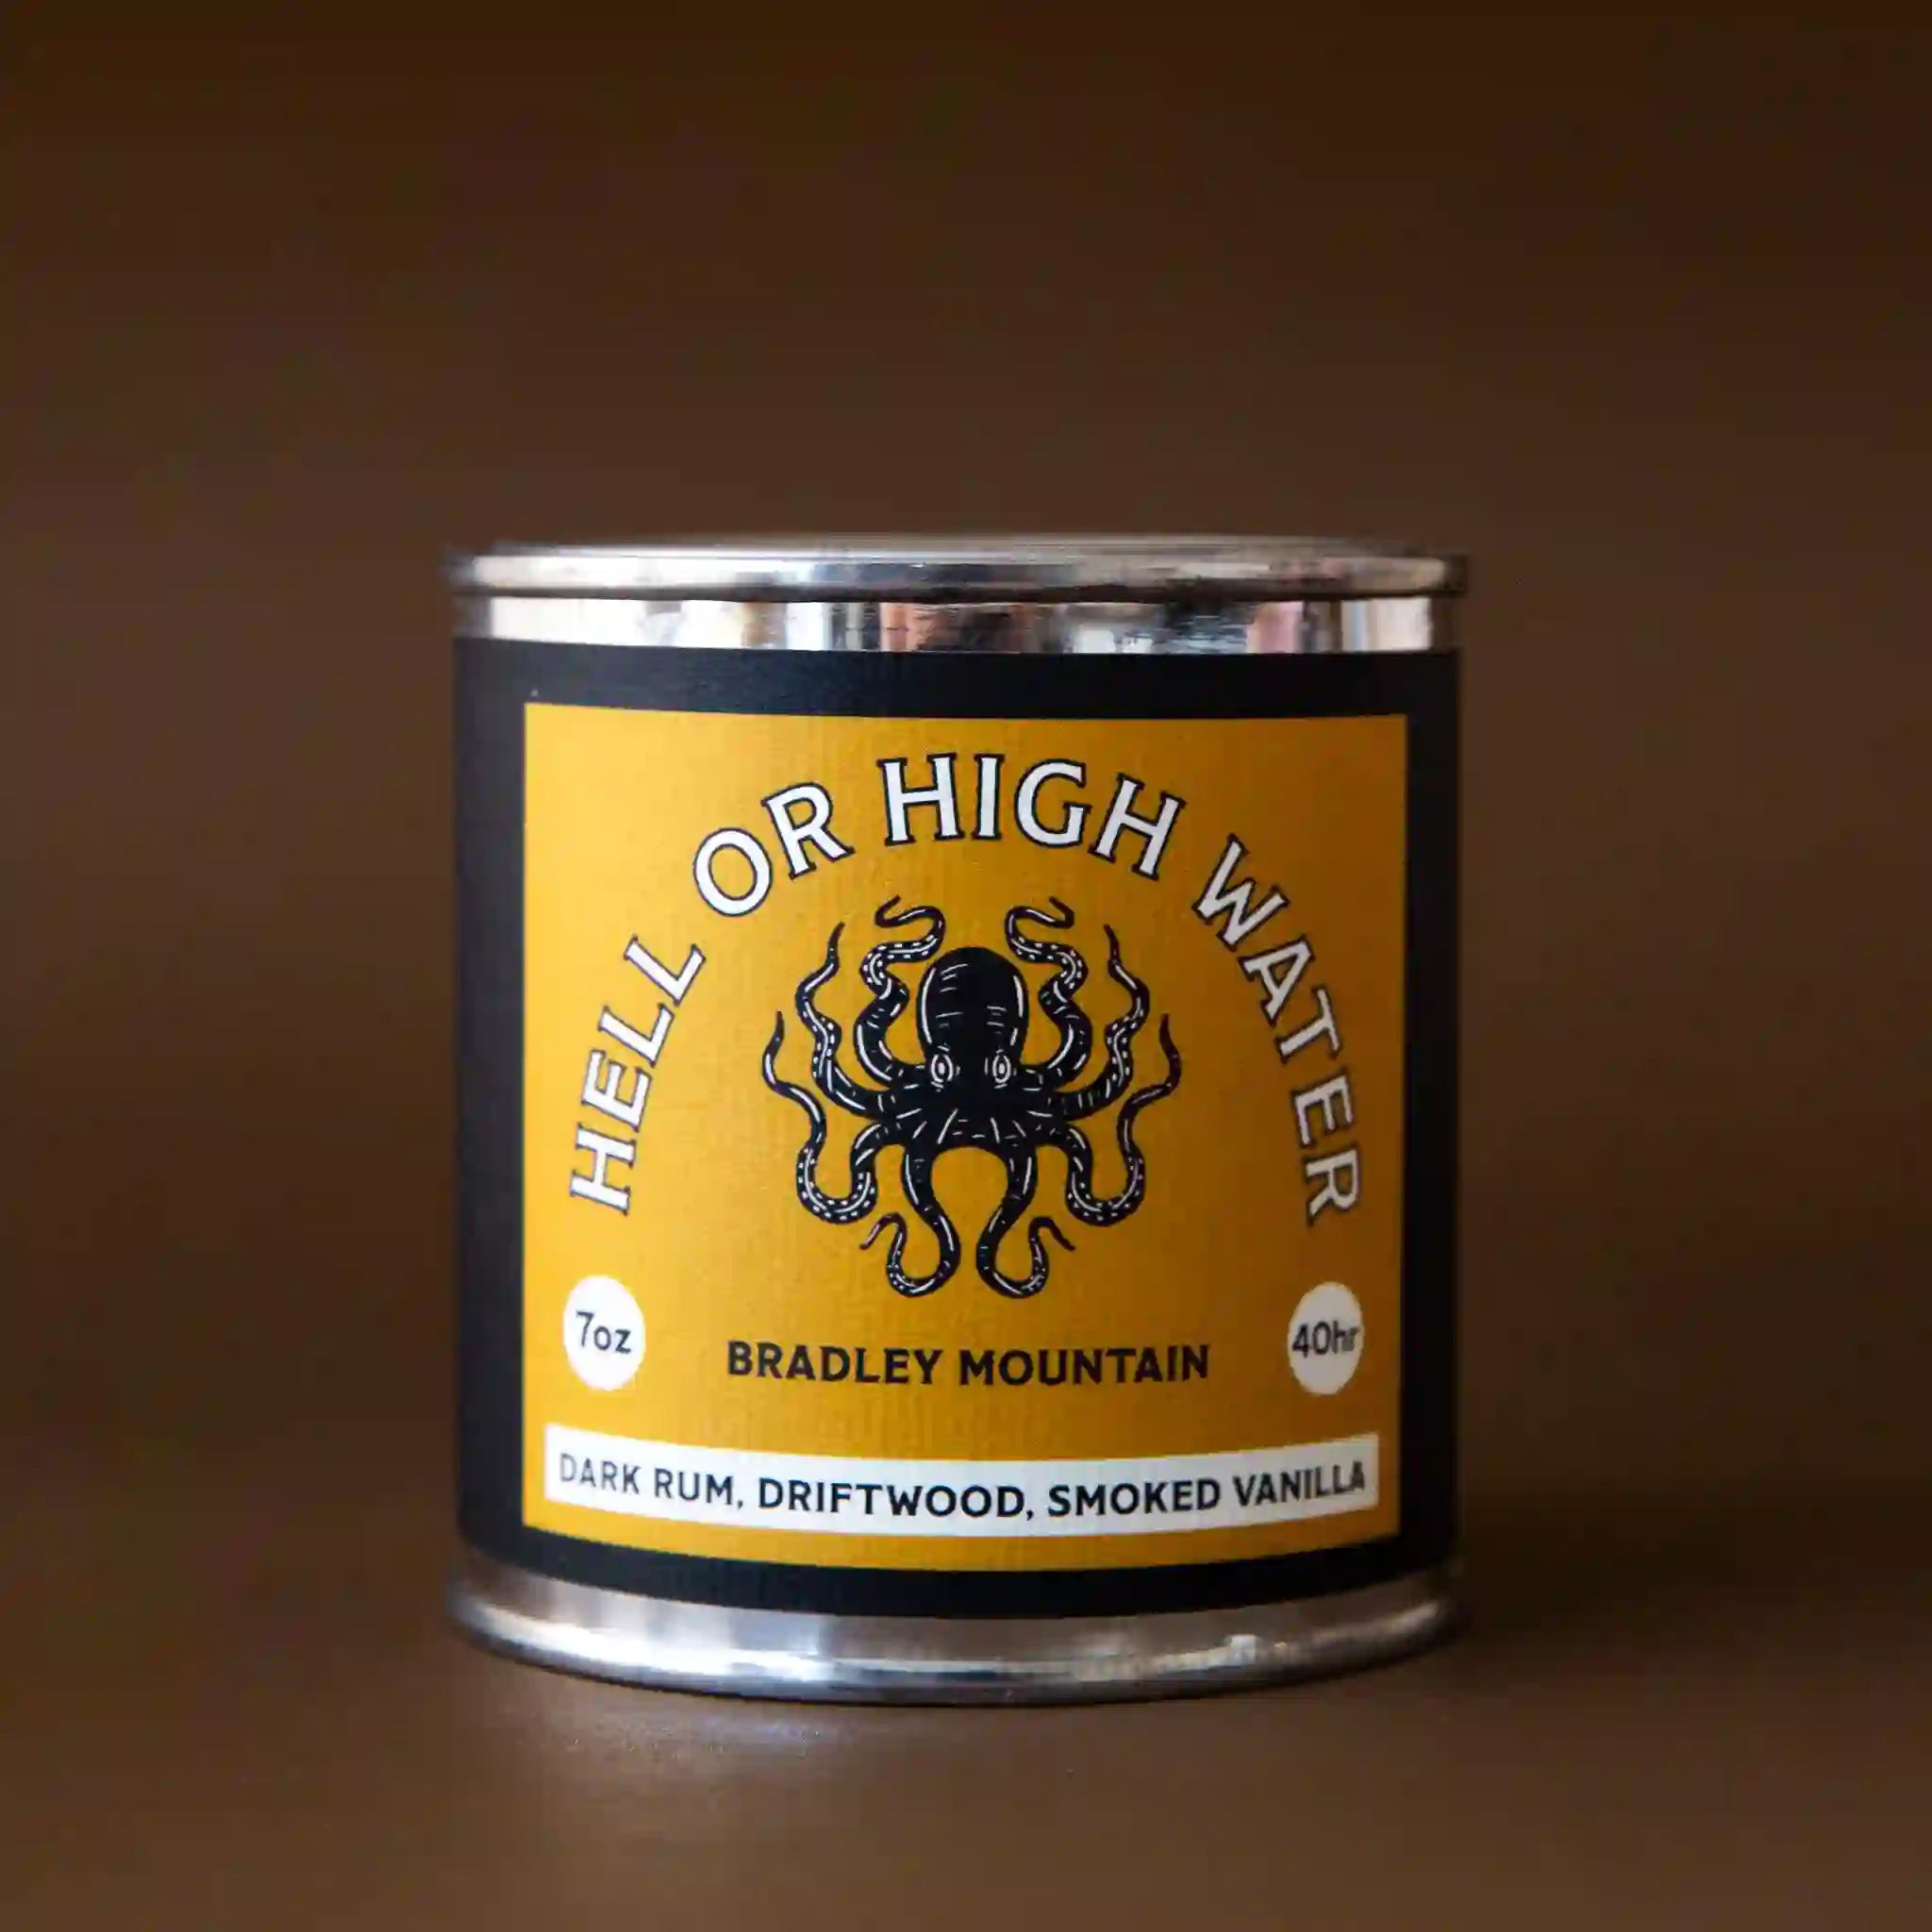 On a brown background is a tin candle with a yellow label featuring a octopus graphic and text arched above it that reads, &quot;Hell or High Water Bradley Mountain&quot;.